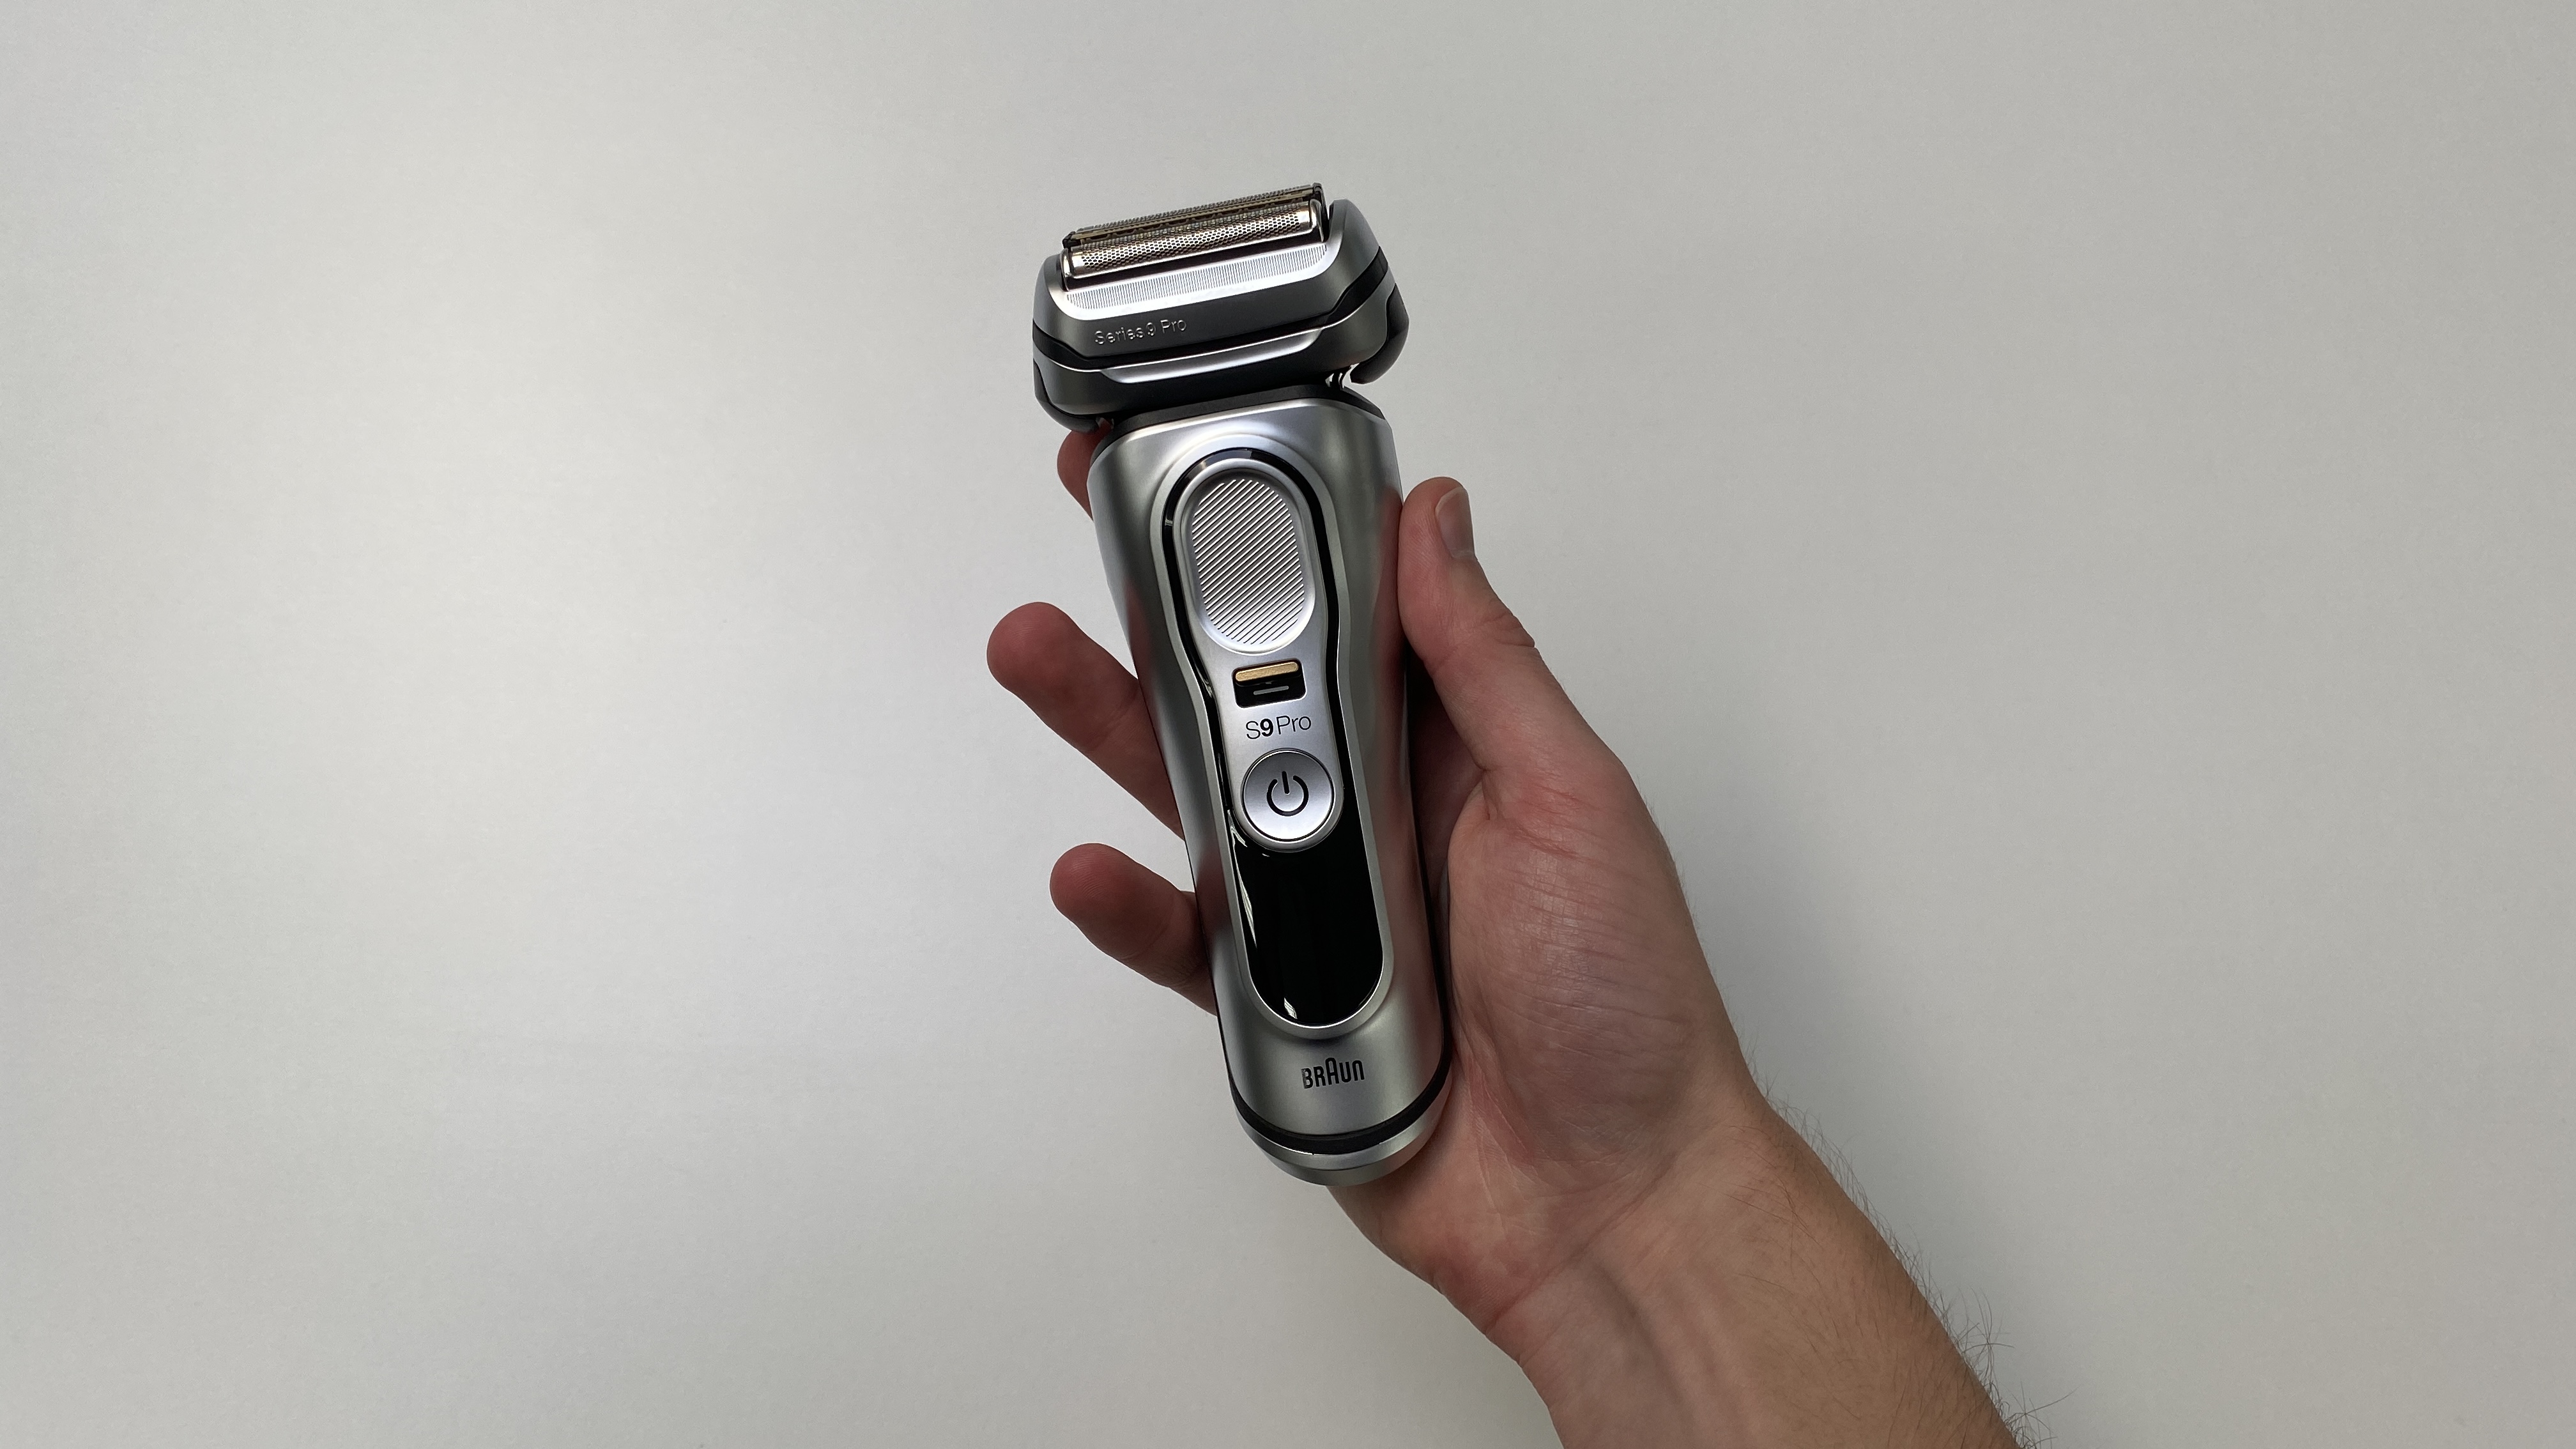 Braun Series 9 Pro review: a beast of a trimmer with an equally beastly  price tag - TECHTELEGRAPH